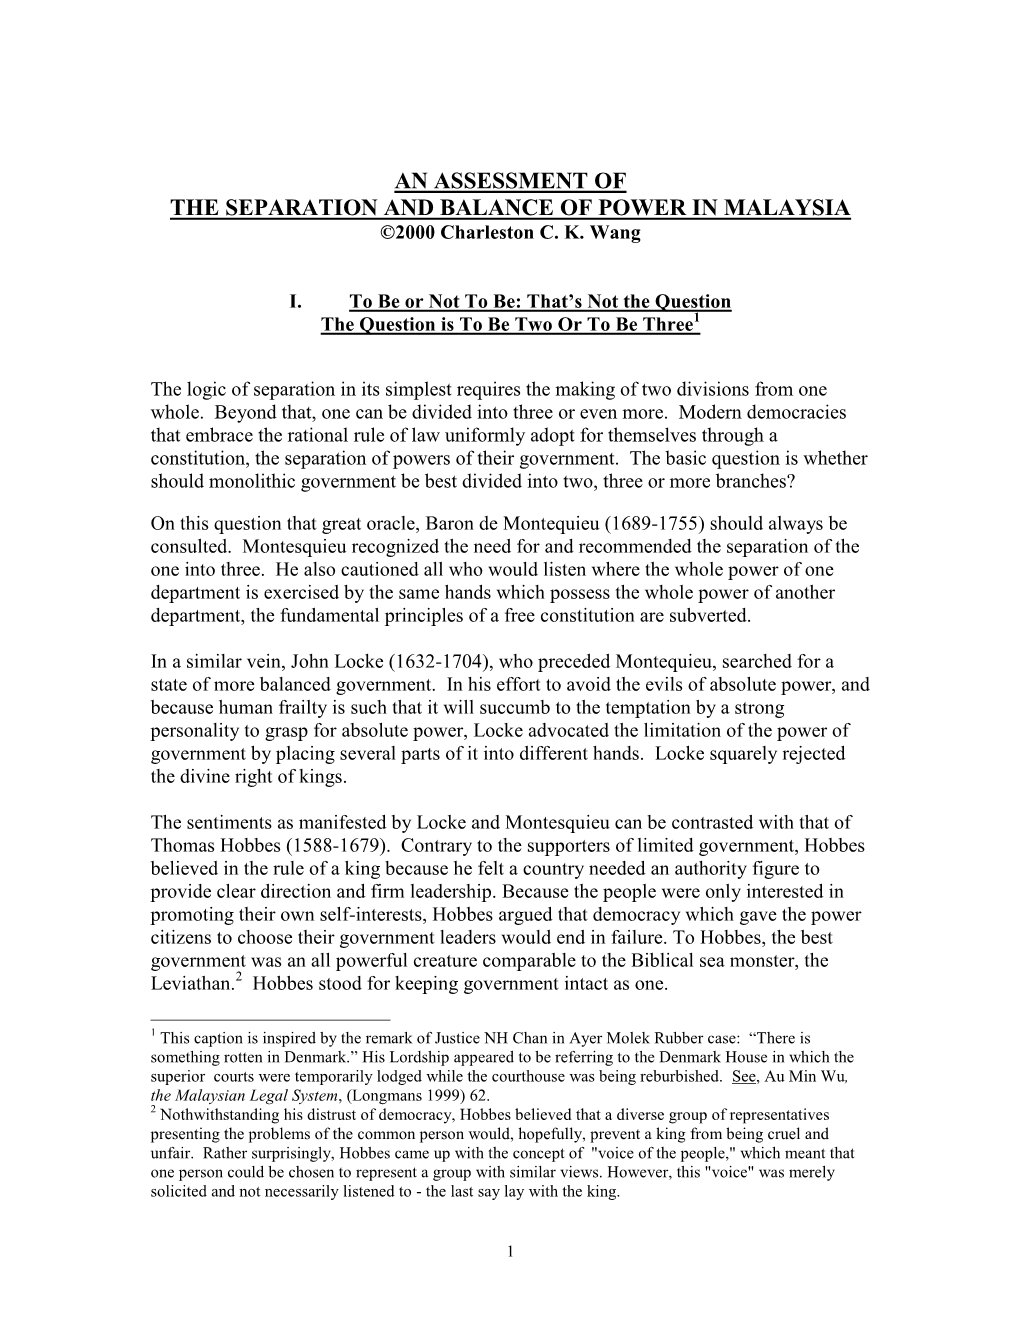 AN ASSESSMENT of the SEPARATION and BALANCE of POWER in MALAYSIA ©2000 Charleston C